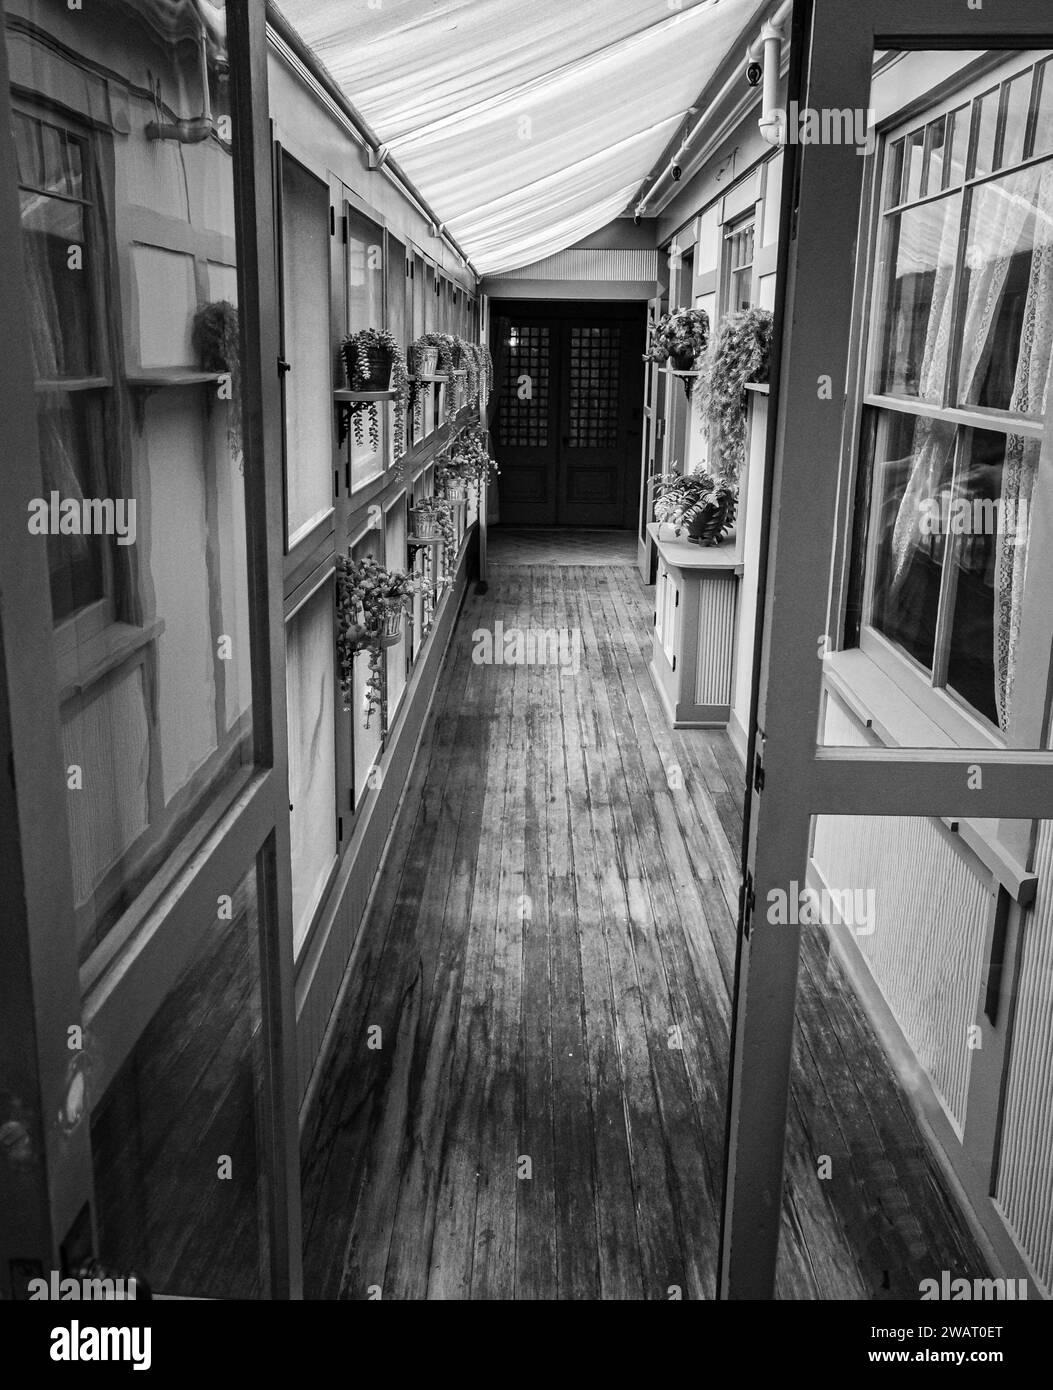 A Hallway inside the Winchester mystery house Stock Photo